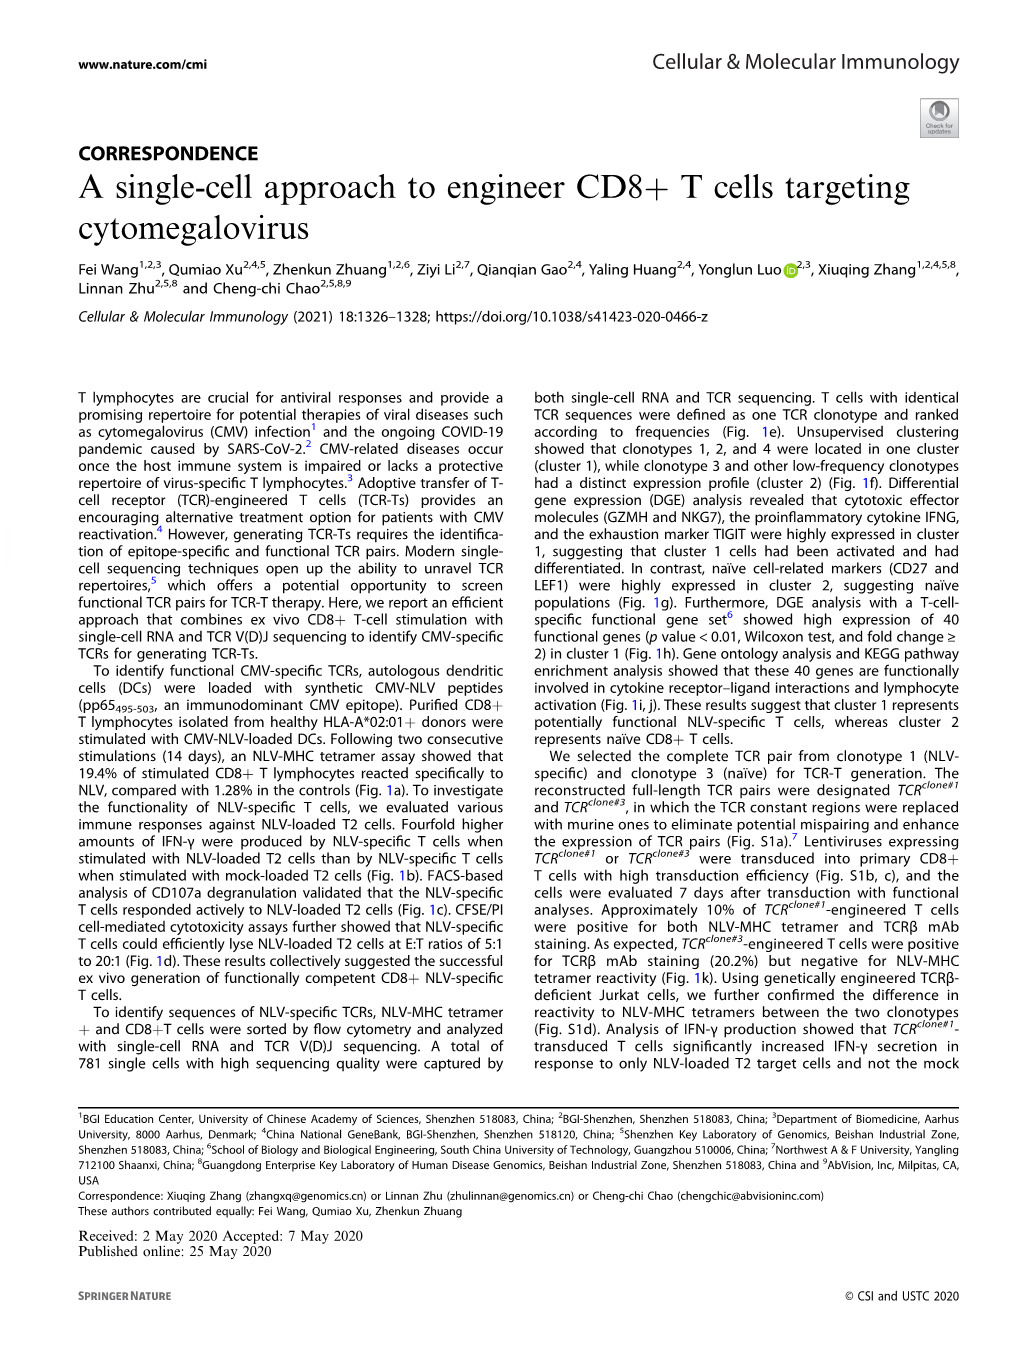 A Single-Cell Approach to Engineer CD8+ T Cells Targeting Cytomegalovirus